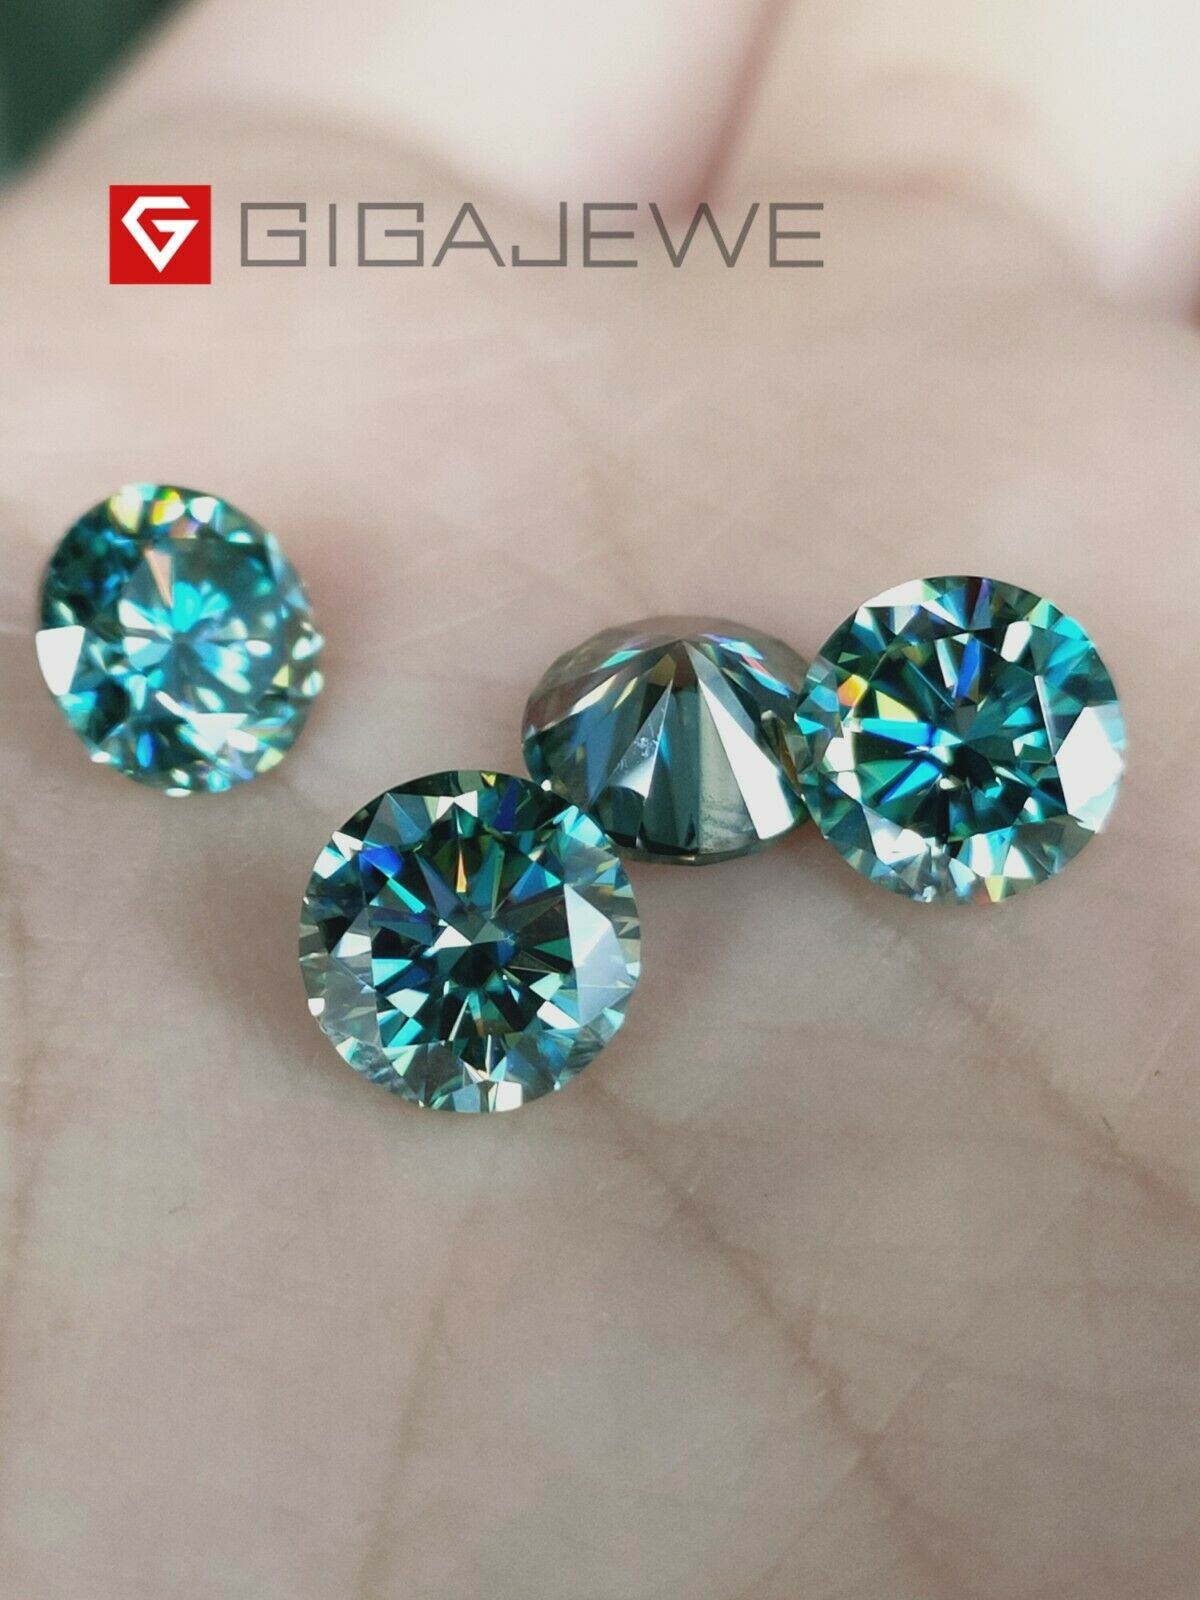 Cyan Blue Color Round Cut Moissanite Stone Loose Gemstone For Jewelry Making